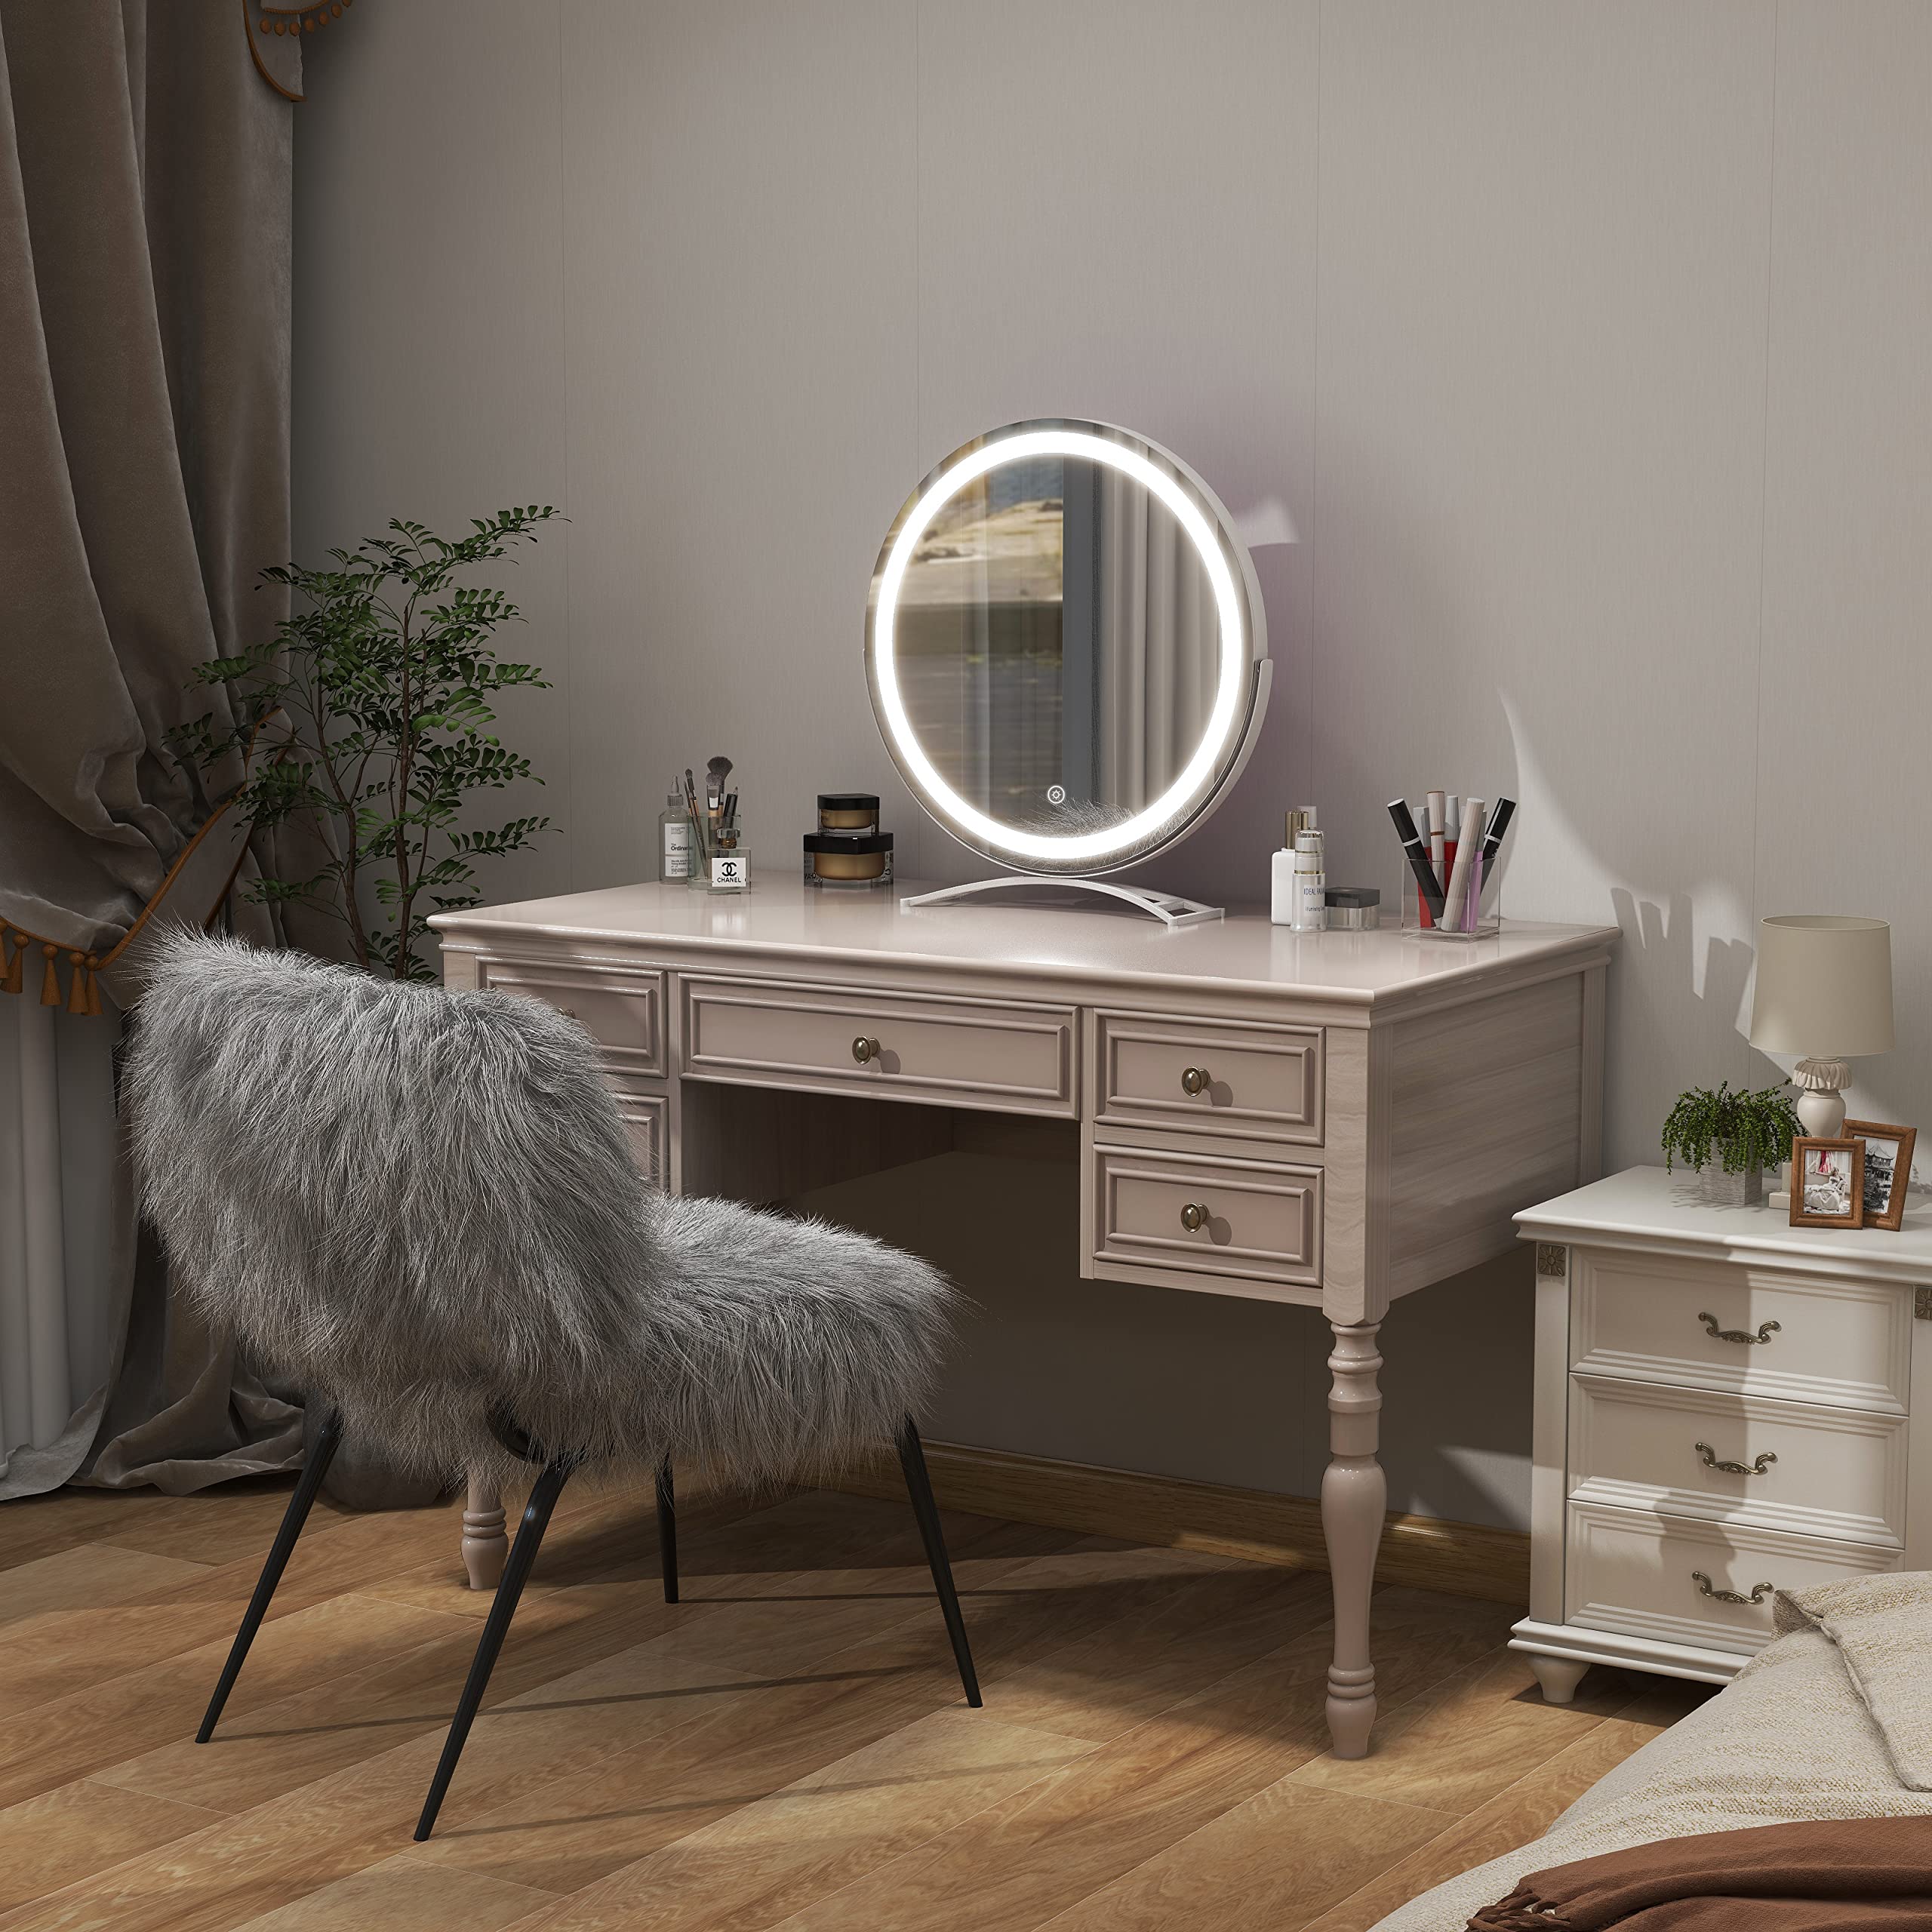 Vierose 18 Inch Large Vanity Mirror with Lights, Round Light Up Makeup Mirror, LED Mirror Makeup Mirror with Lights for Bedroom Tabletop, Smart Touch Control 3 Colors Dimmable, 360° Rotation (White)